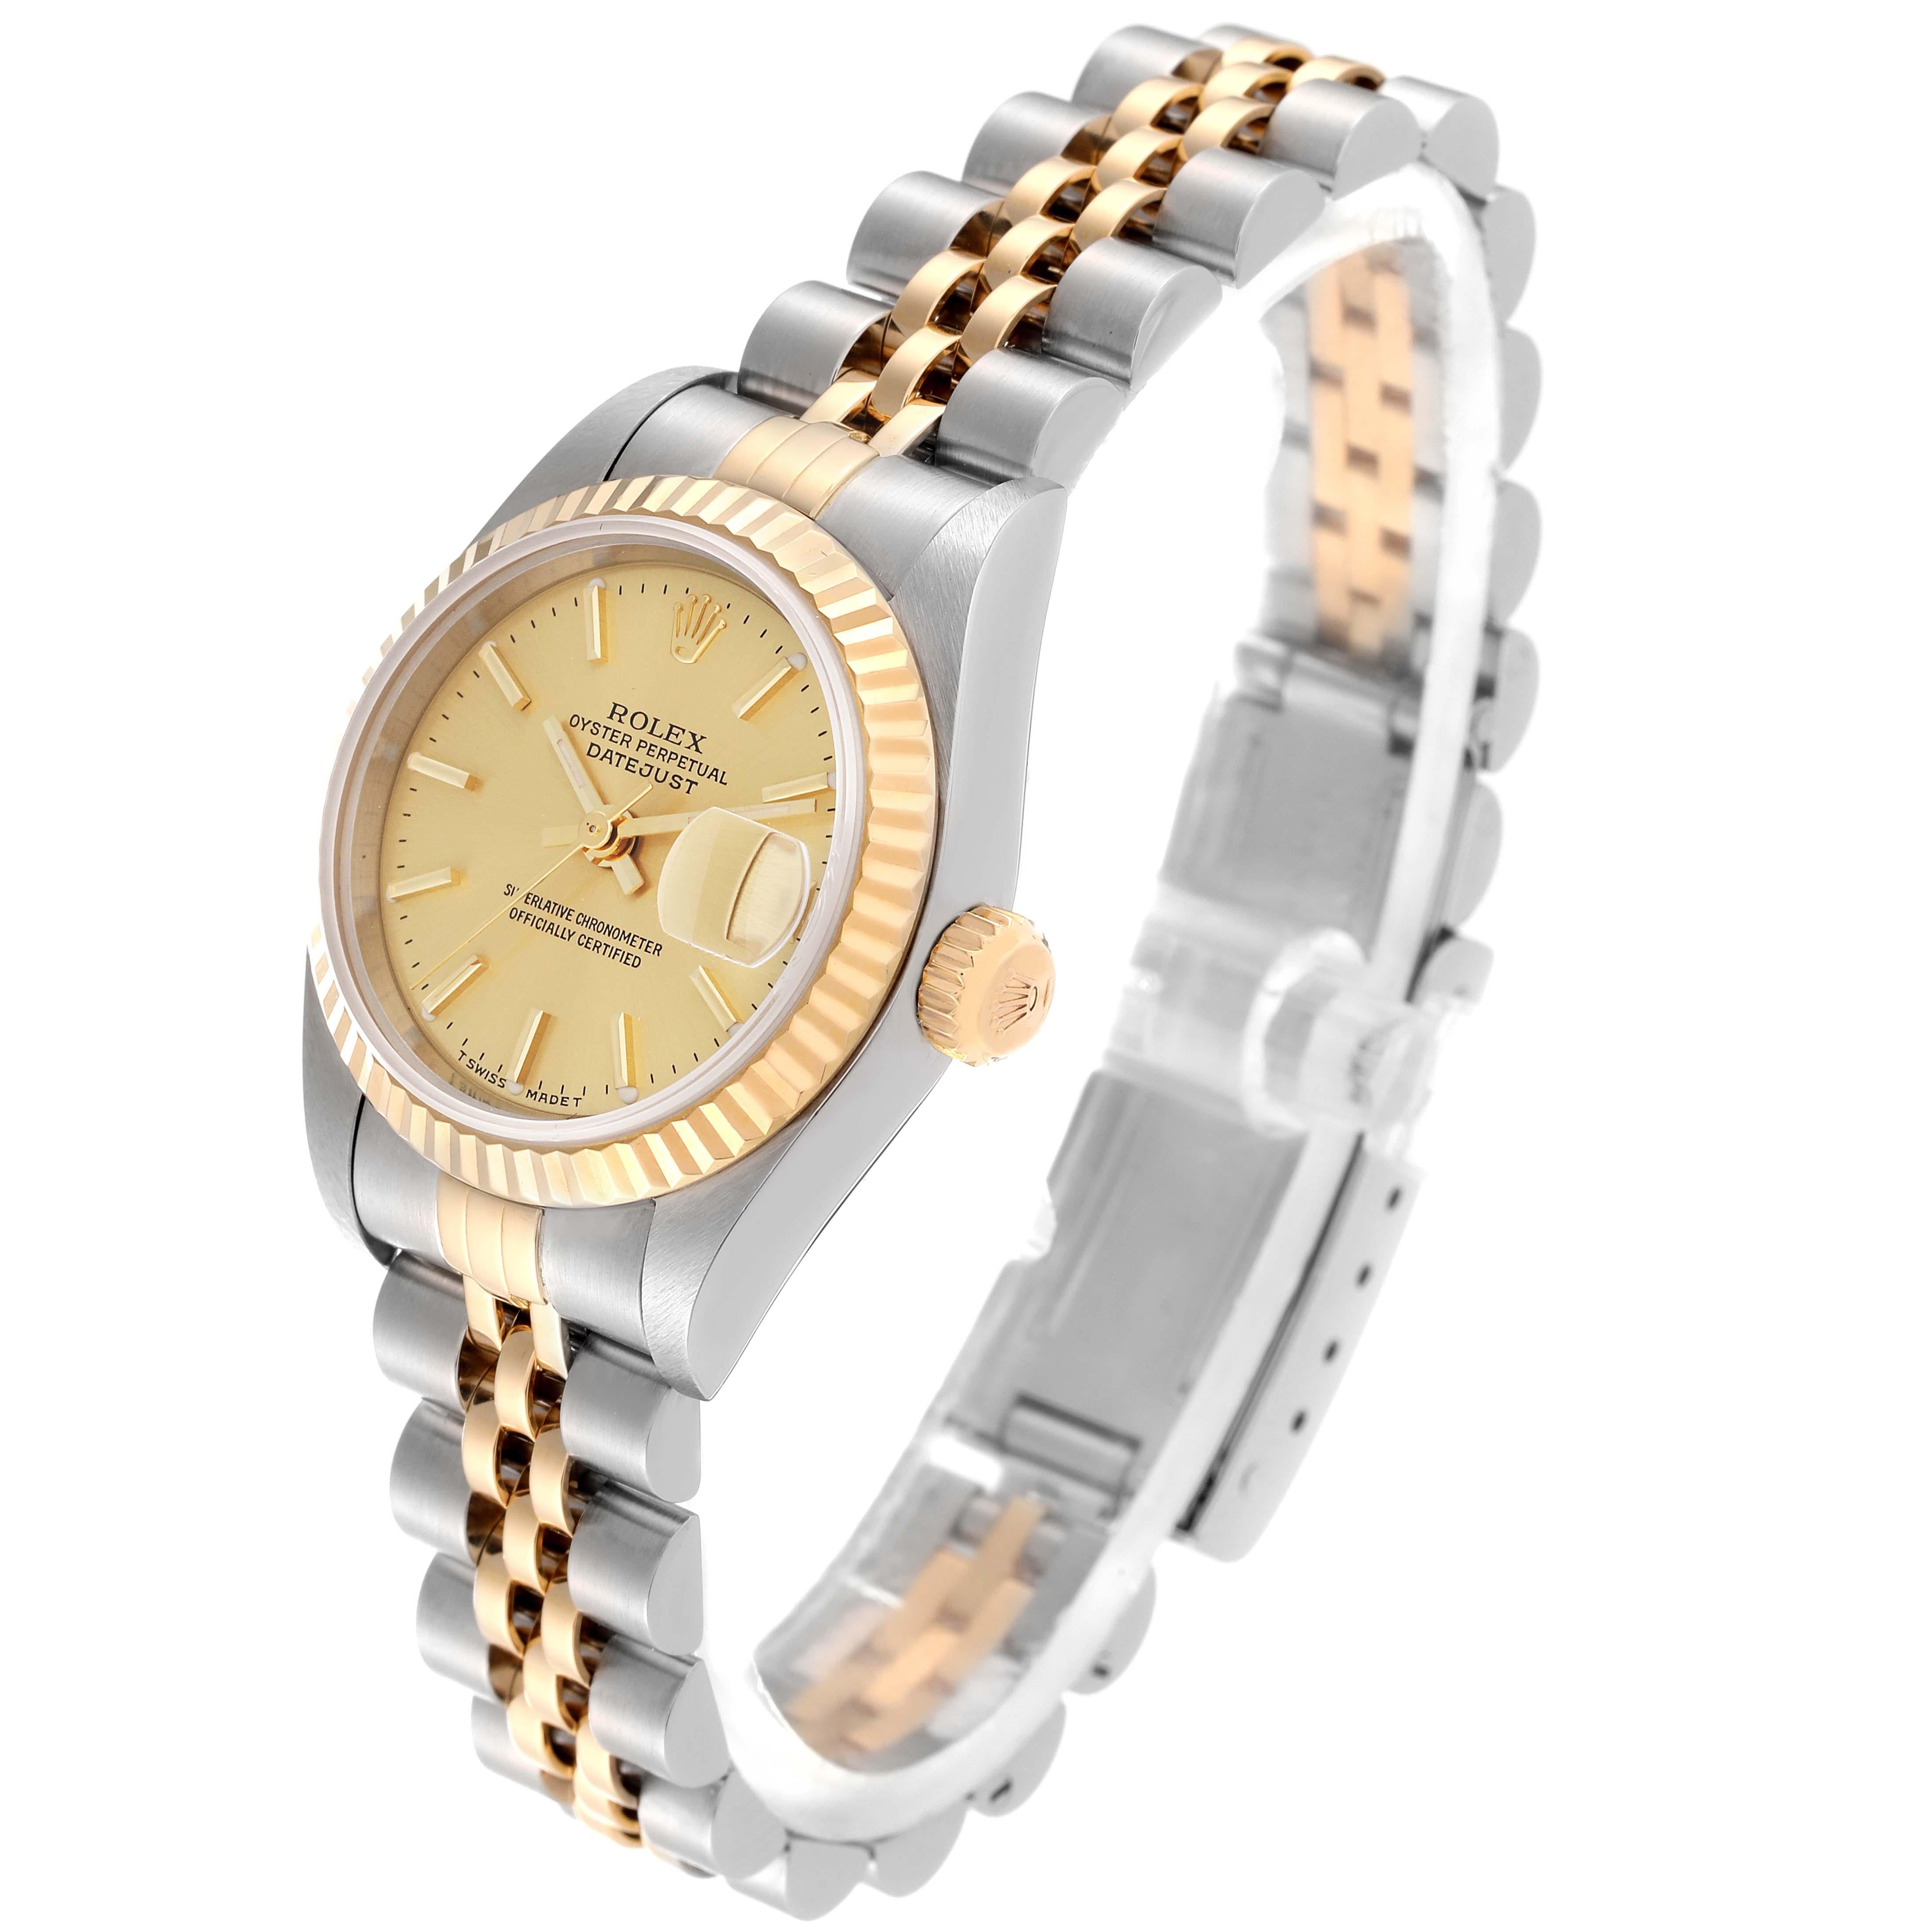 Rolex Datejust Steel Yellow Gold Champagne Dial Ladies Watch 79173 For Sale 1